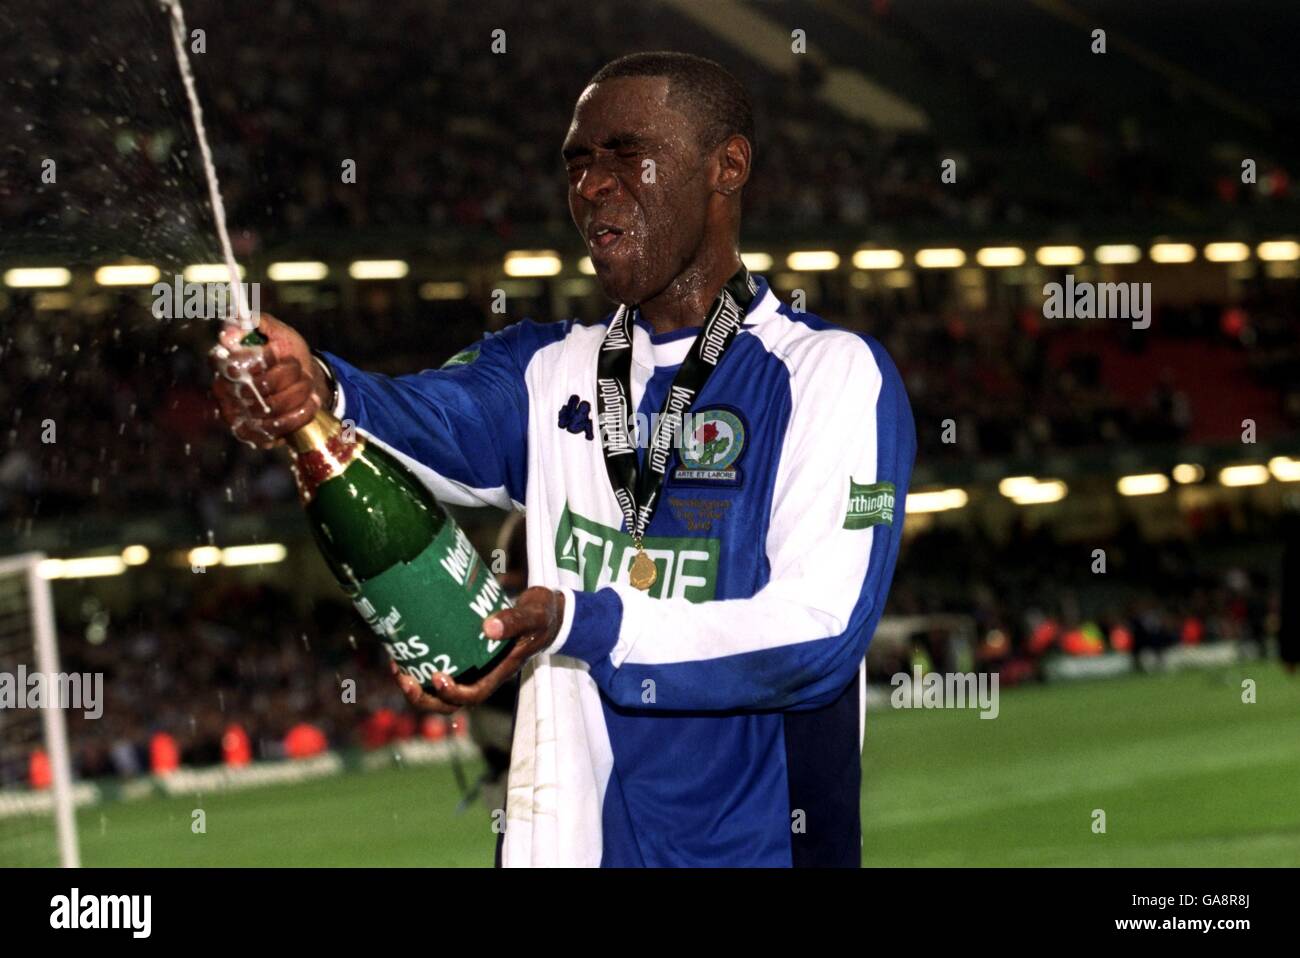 Blackburn Rovers' goalscorer Andy Cole celebrates by spraying champagne at the crowd Stock Photo